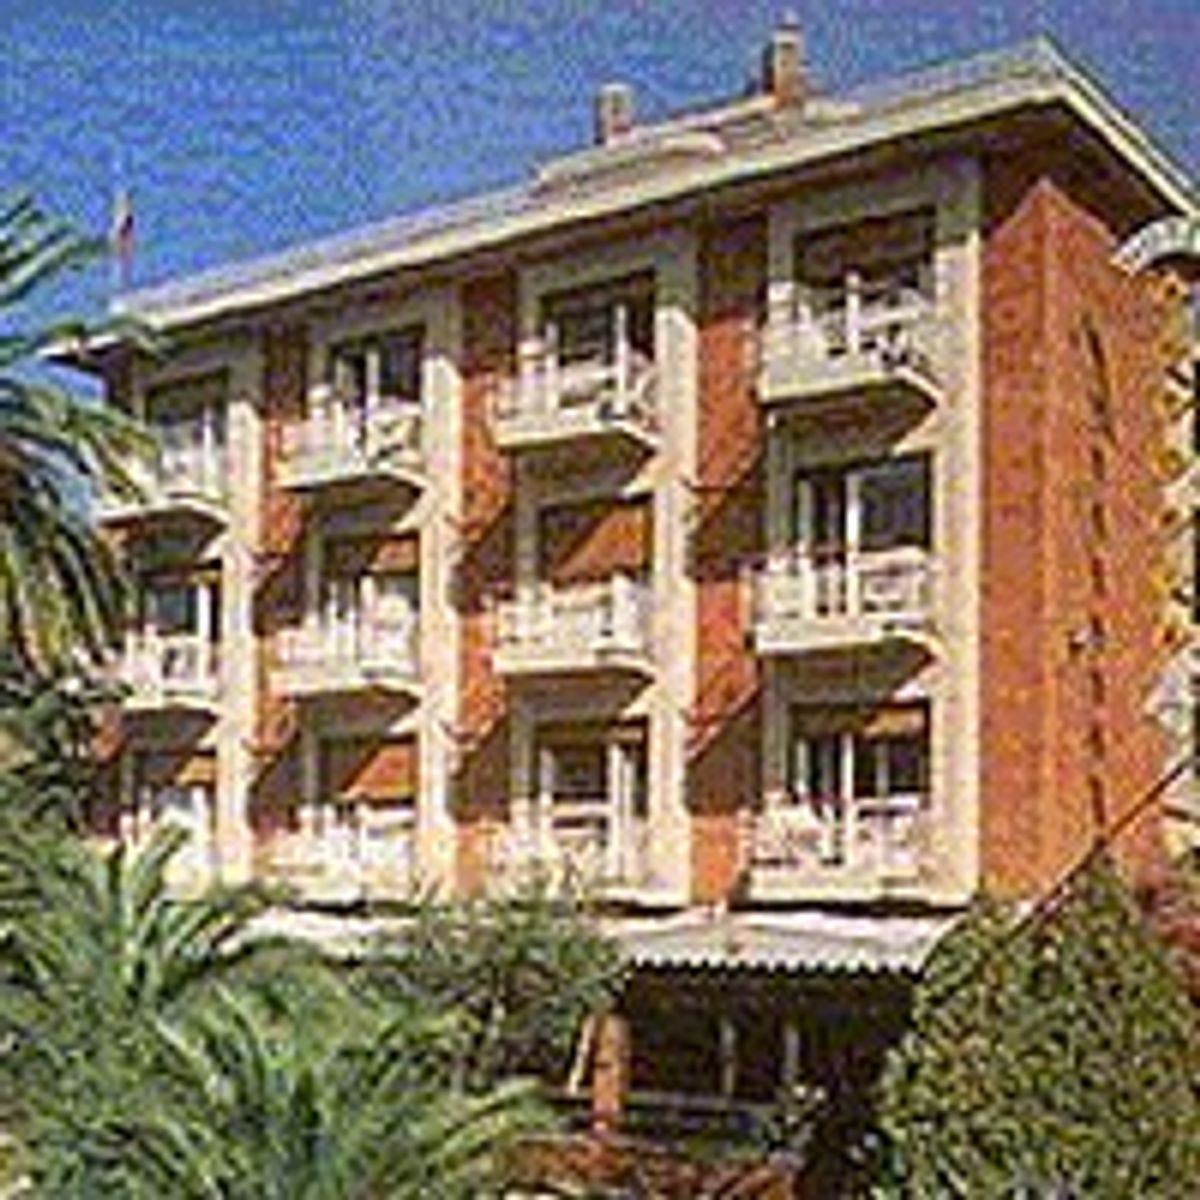 Hotel Modus Vivendi- First Class San Remo, Italy Hotels- GDS